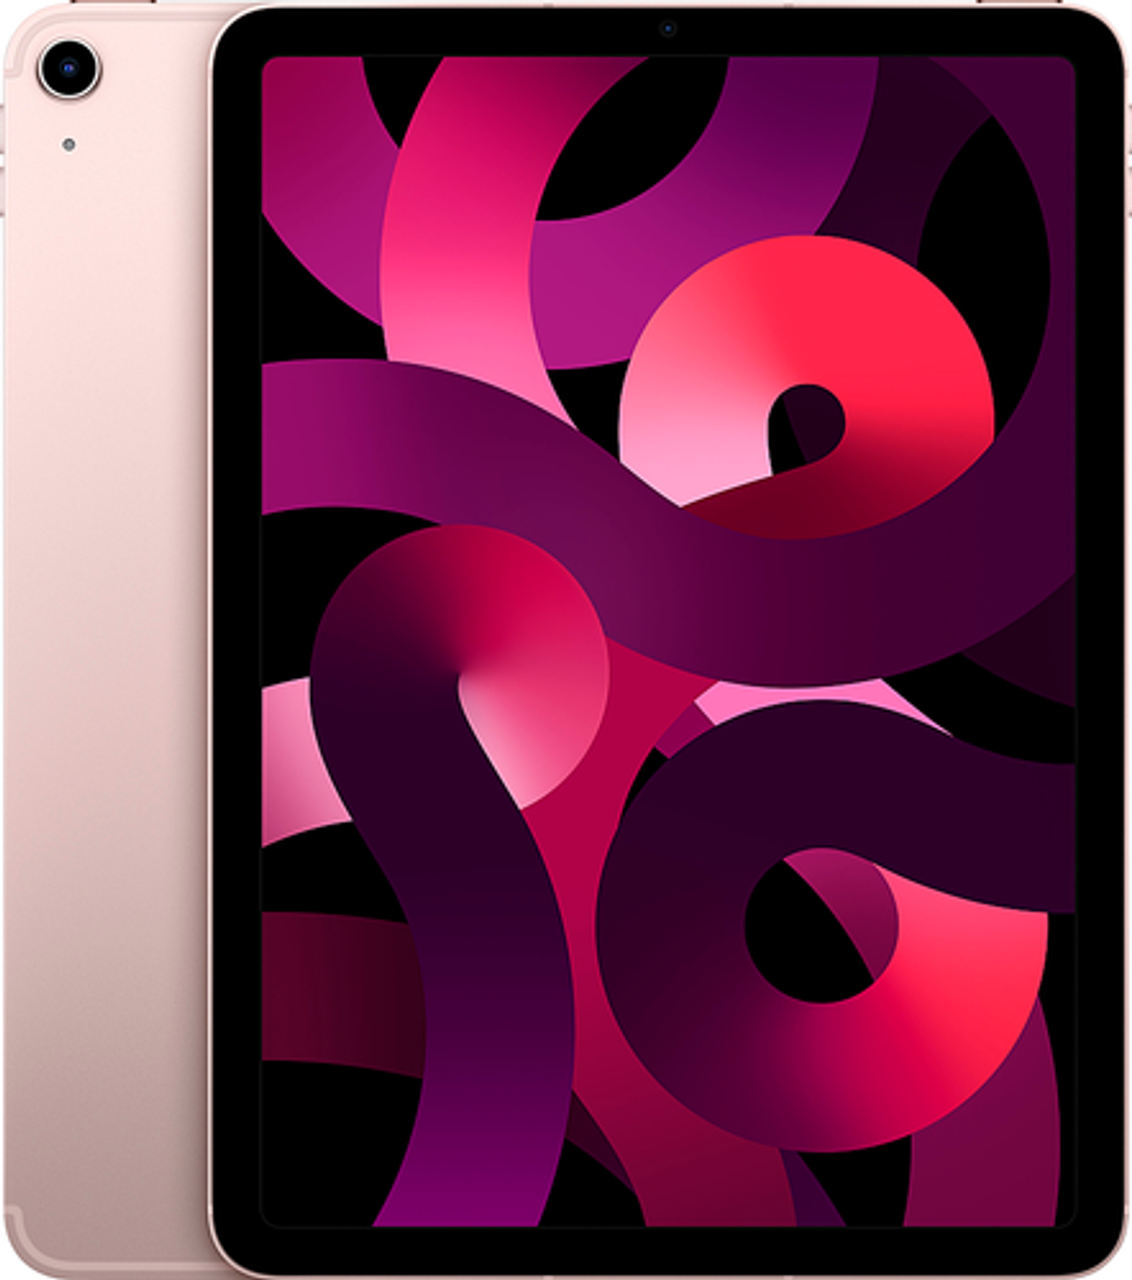 Apple - Geek Squad Certified Refurbished 10.9-Inch iPad Air - Latest Model - (5th Generation) with Wi-Fi - 64GB - Pink